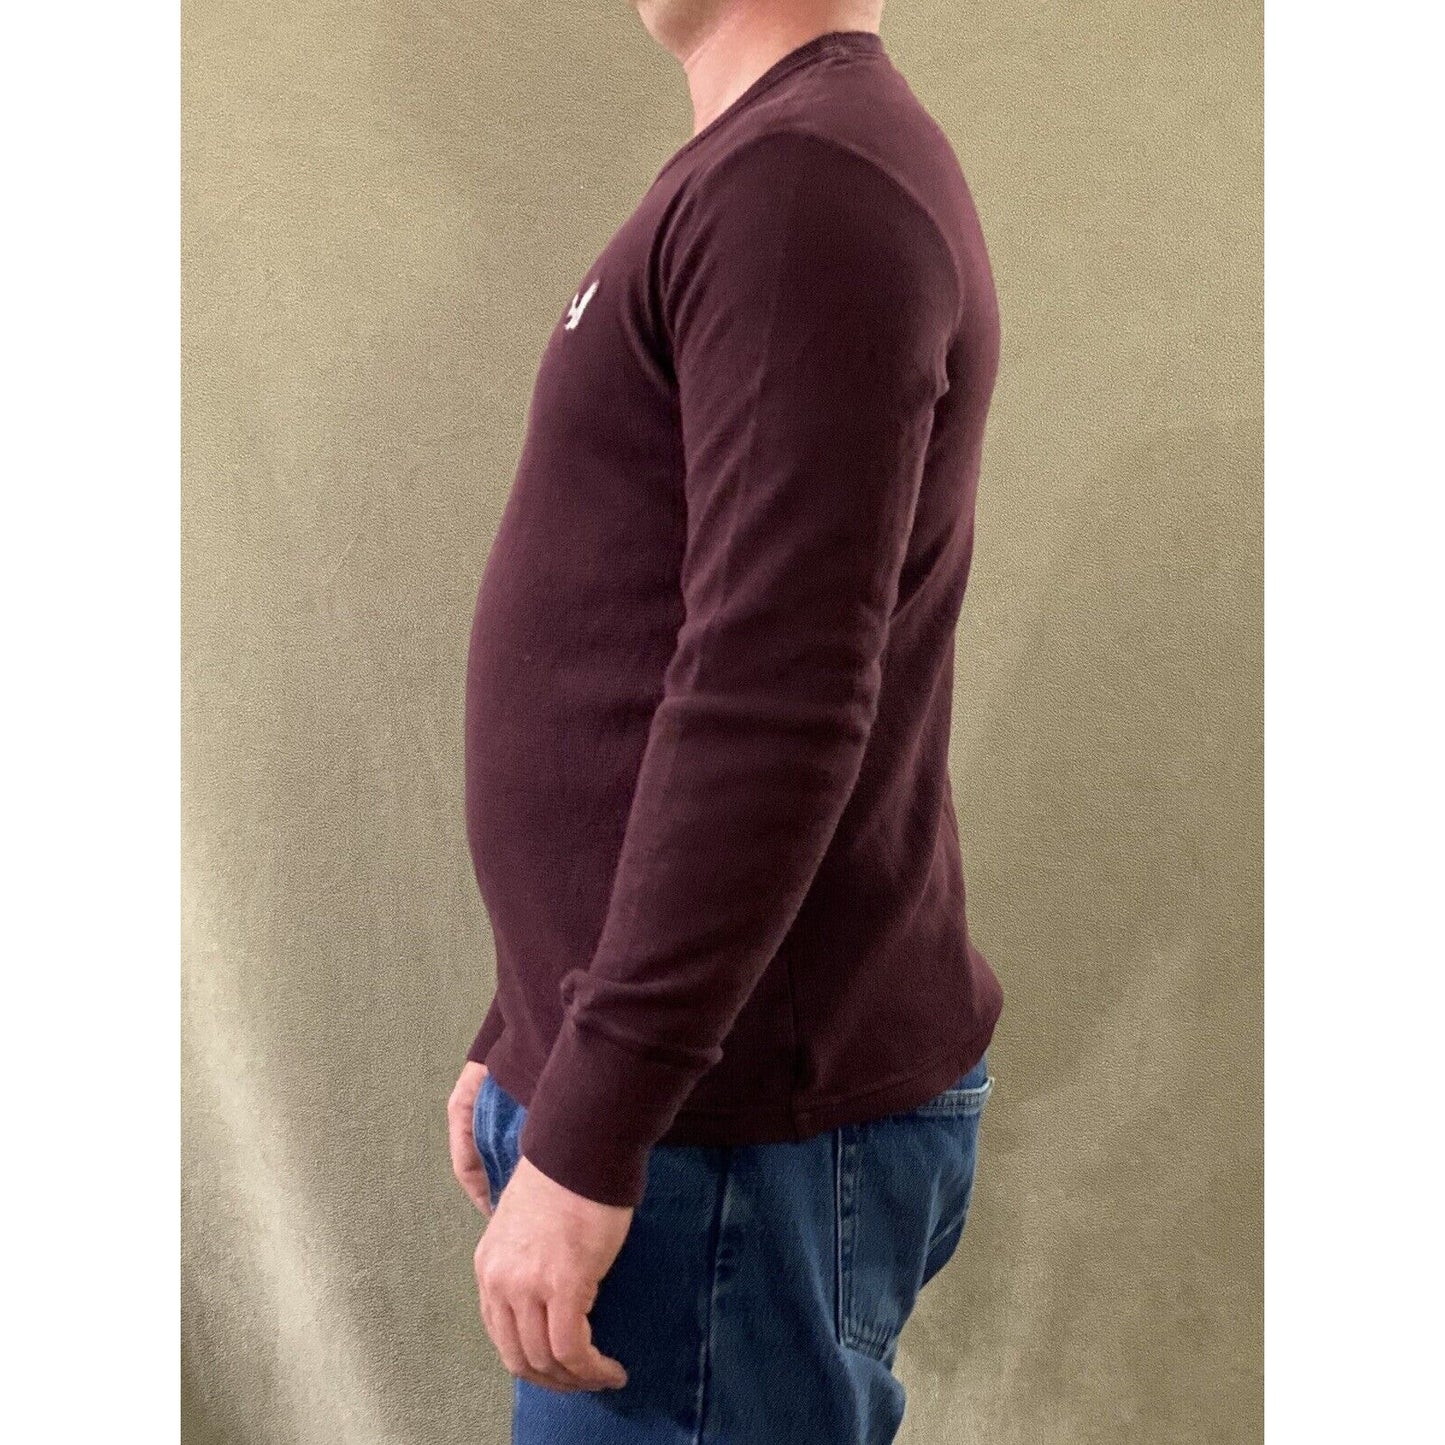 American Eagle Outfitters Men’s Medium Plum Vintage Fit Cotton Pullover Sweater